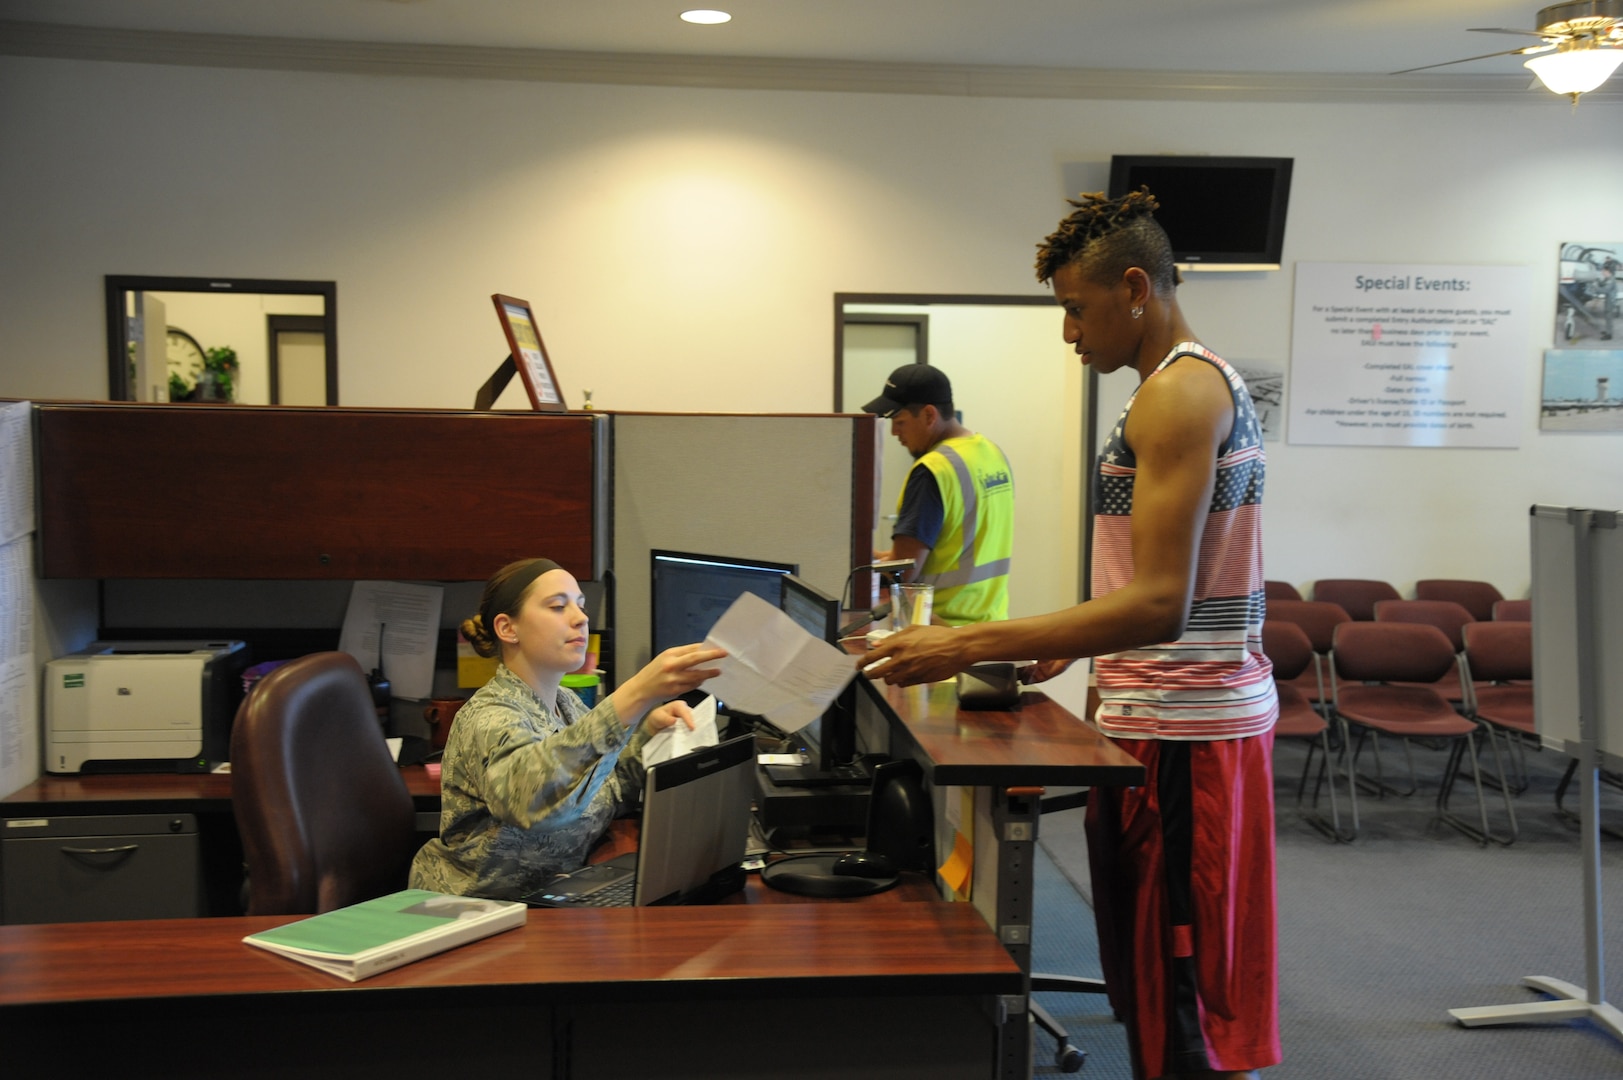 Airman 1st Class Kara Kielty, 902nd Security Forces Squadron, issues a visitor pass June 16, 2015 at the Joint Base San Antonio-Randolph Visitor Control Center.  Personnel not in possession of a Military ID, DOD civilian or contractor ID, or previously issued and active base access passes must enter JBSA-Randolph through the visitor control center. (U. S. Air Force photo by Joel Martinez)